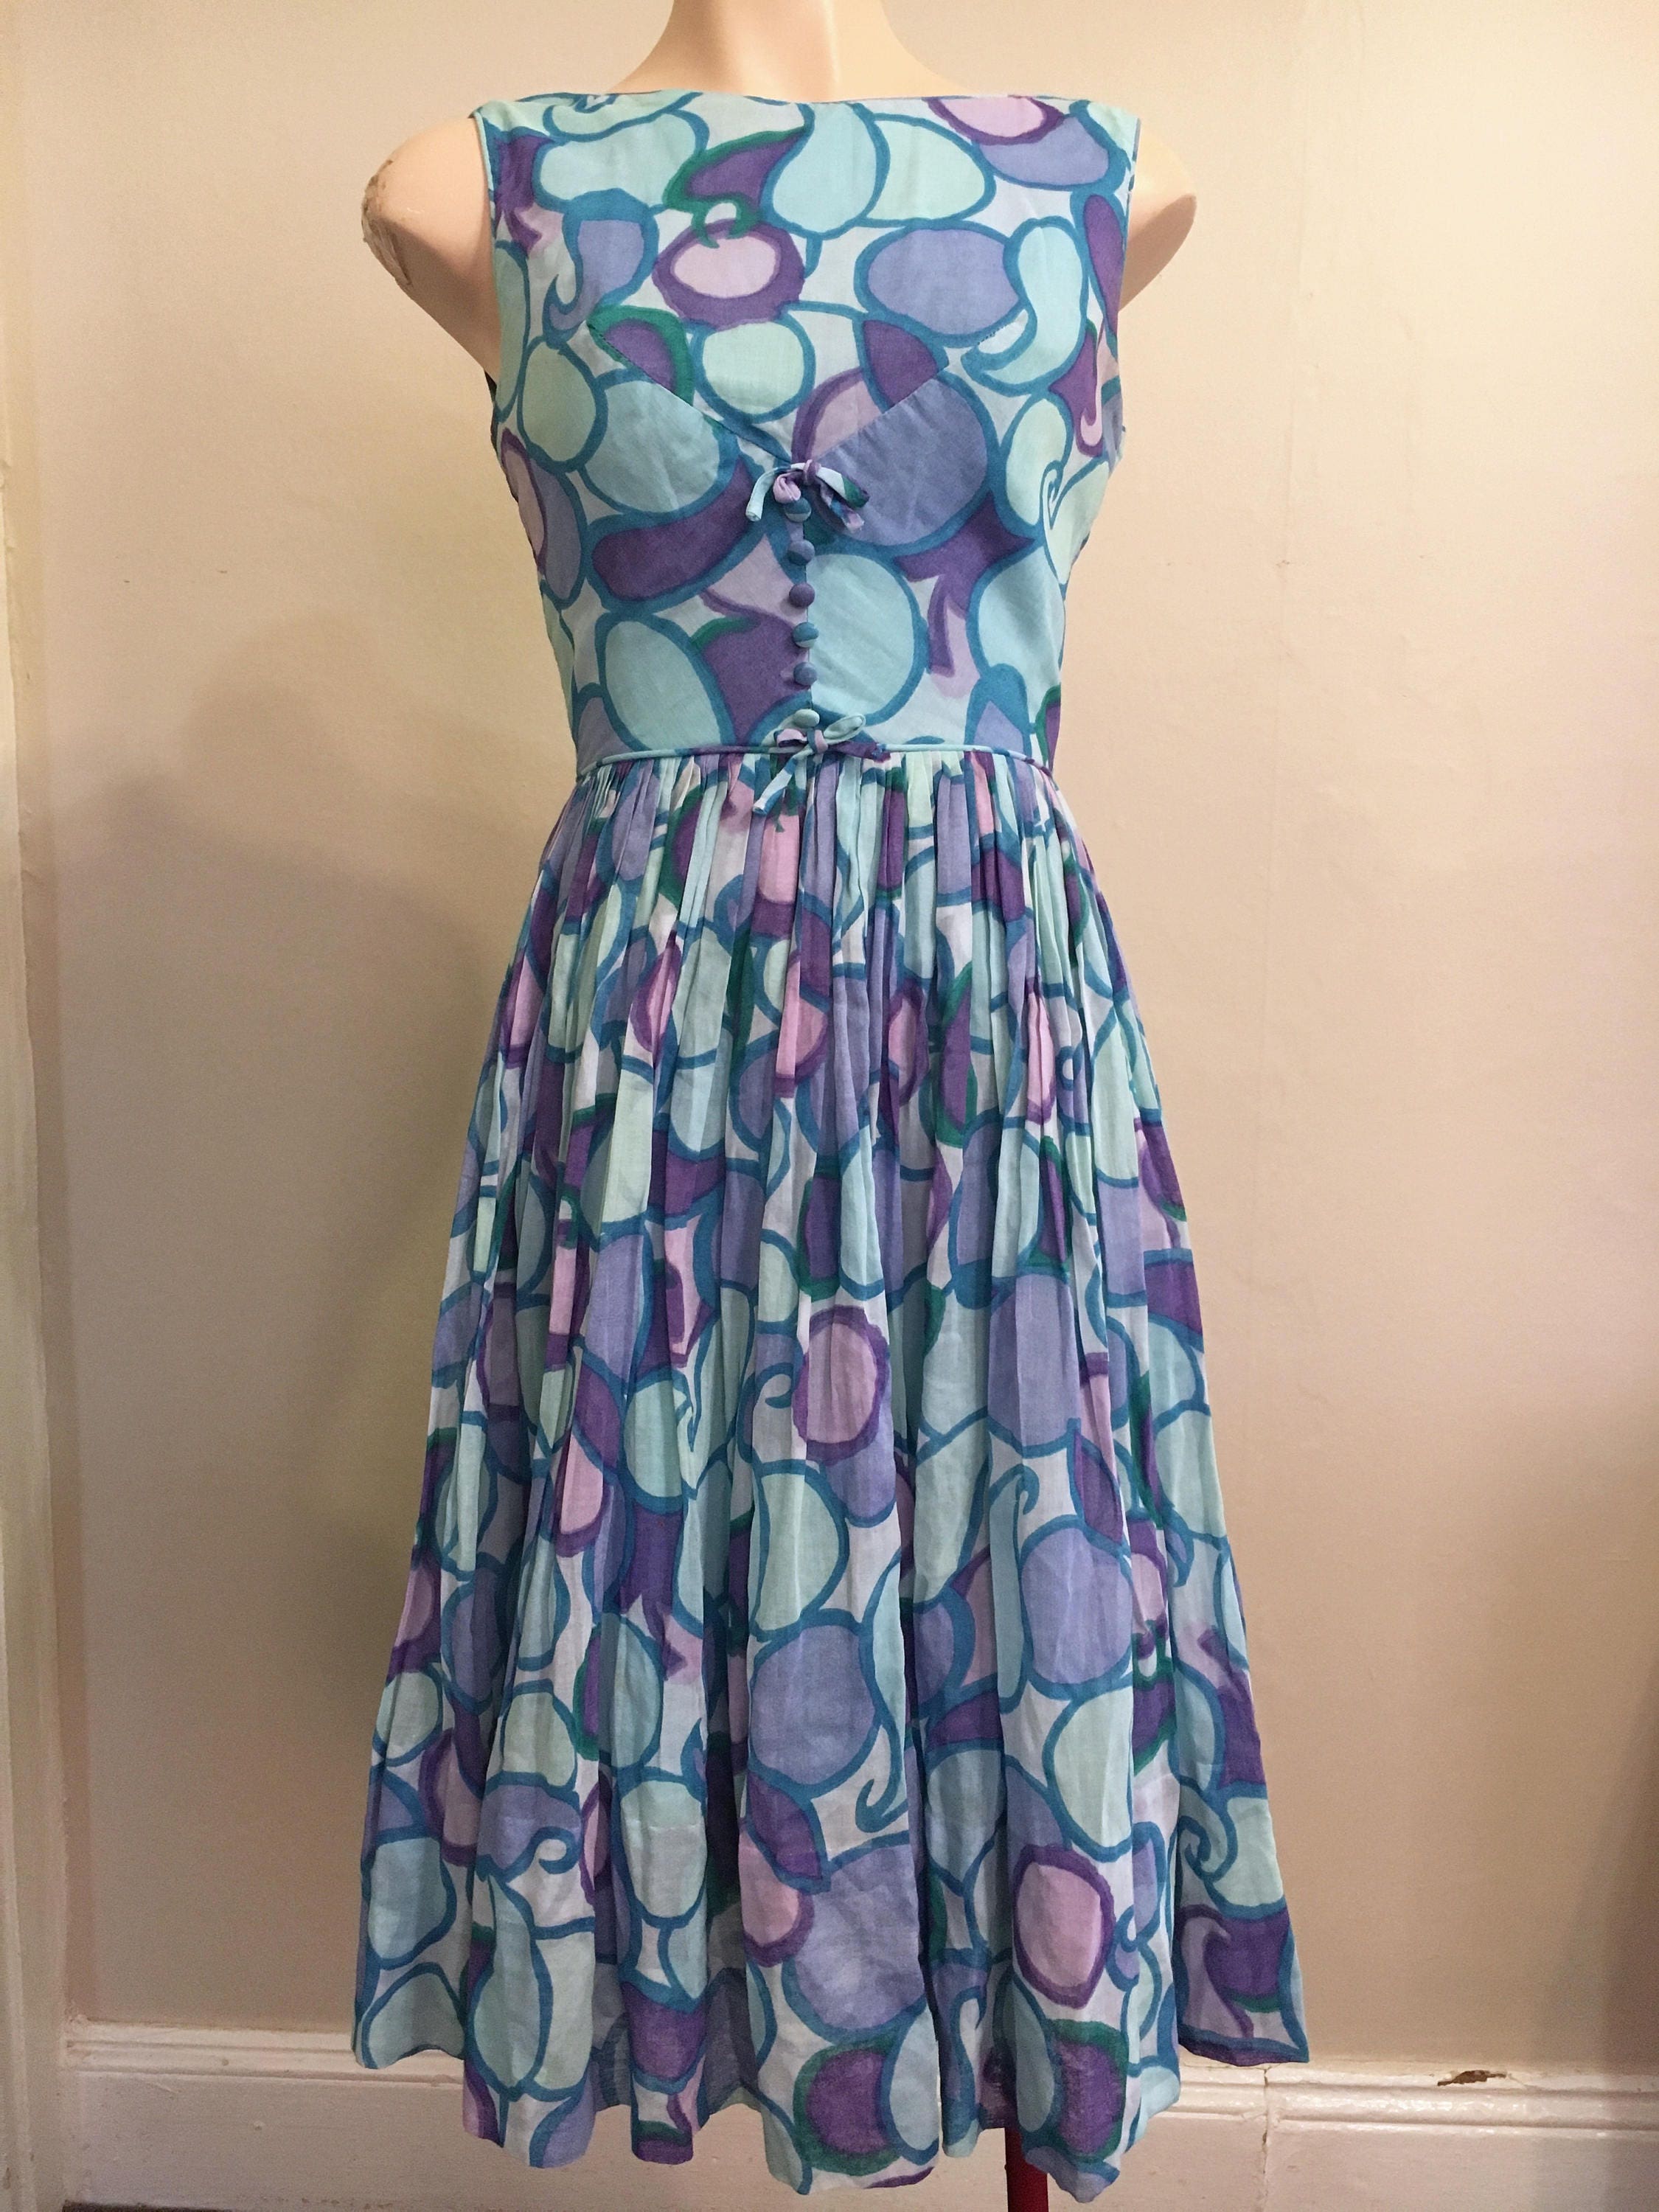 1950s Fit and Flare / Blue Purple and Teal Dress With Swirl | Etsy